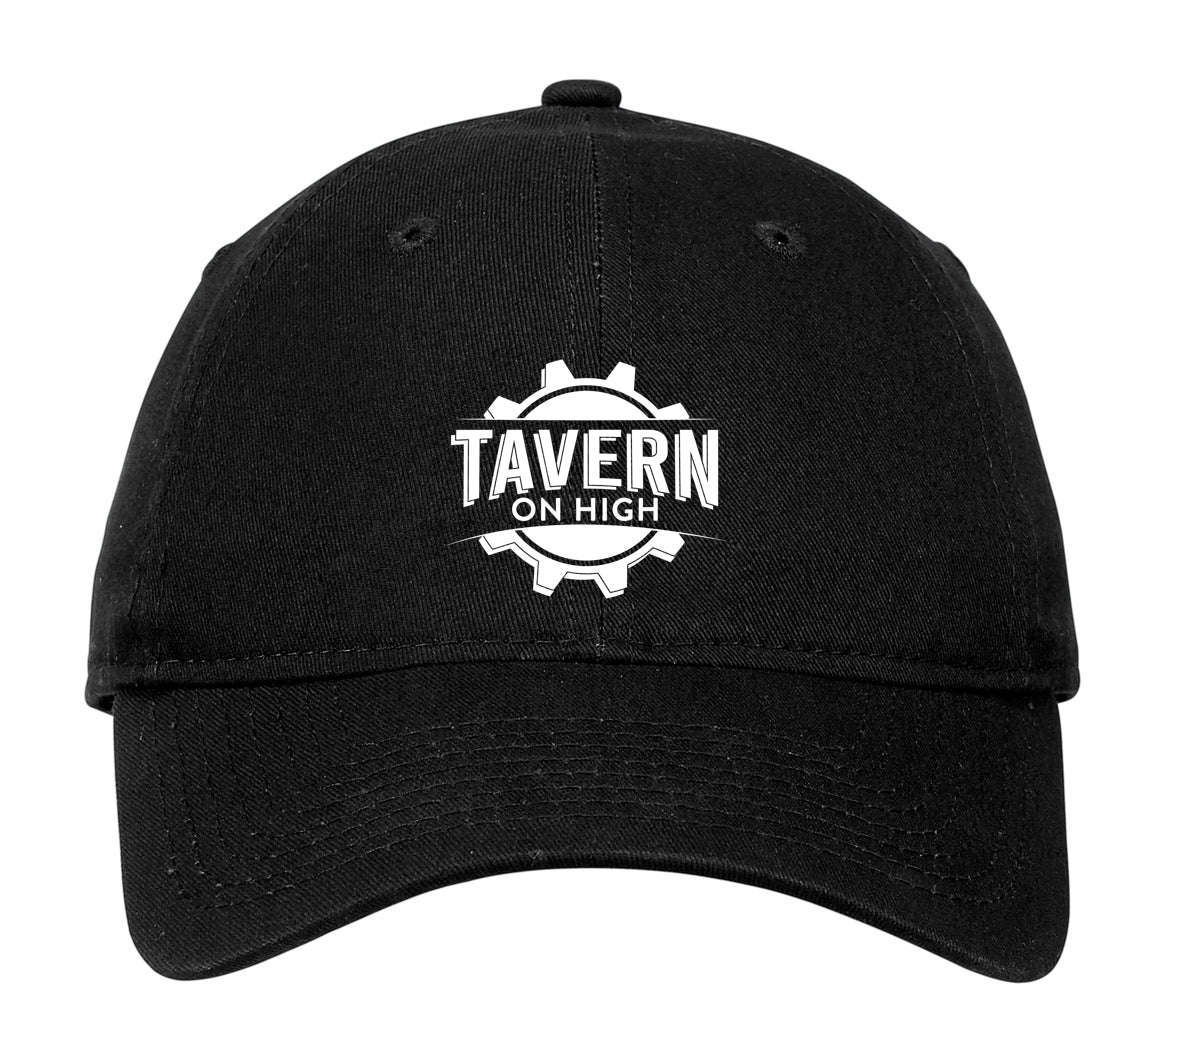 Tavern on High Unstructured Cap